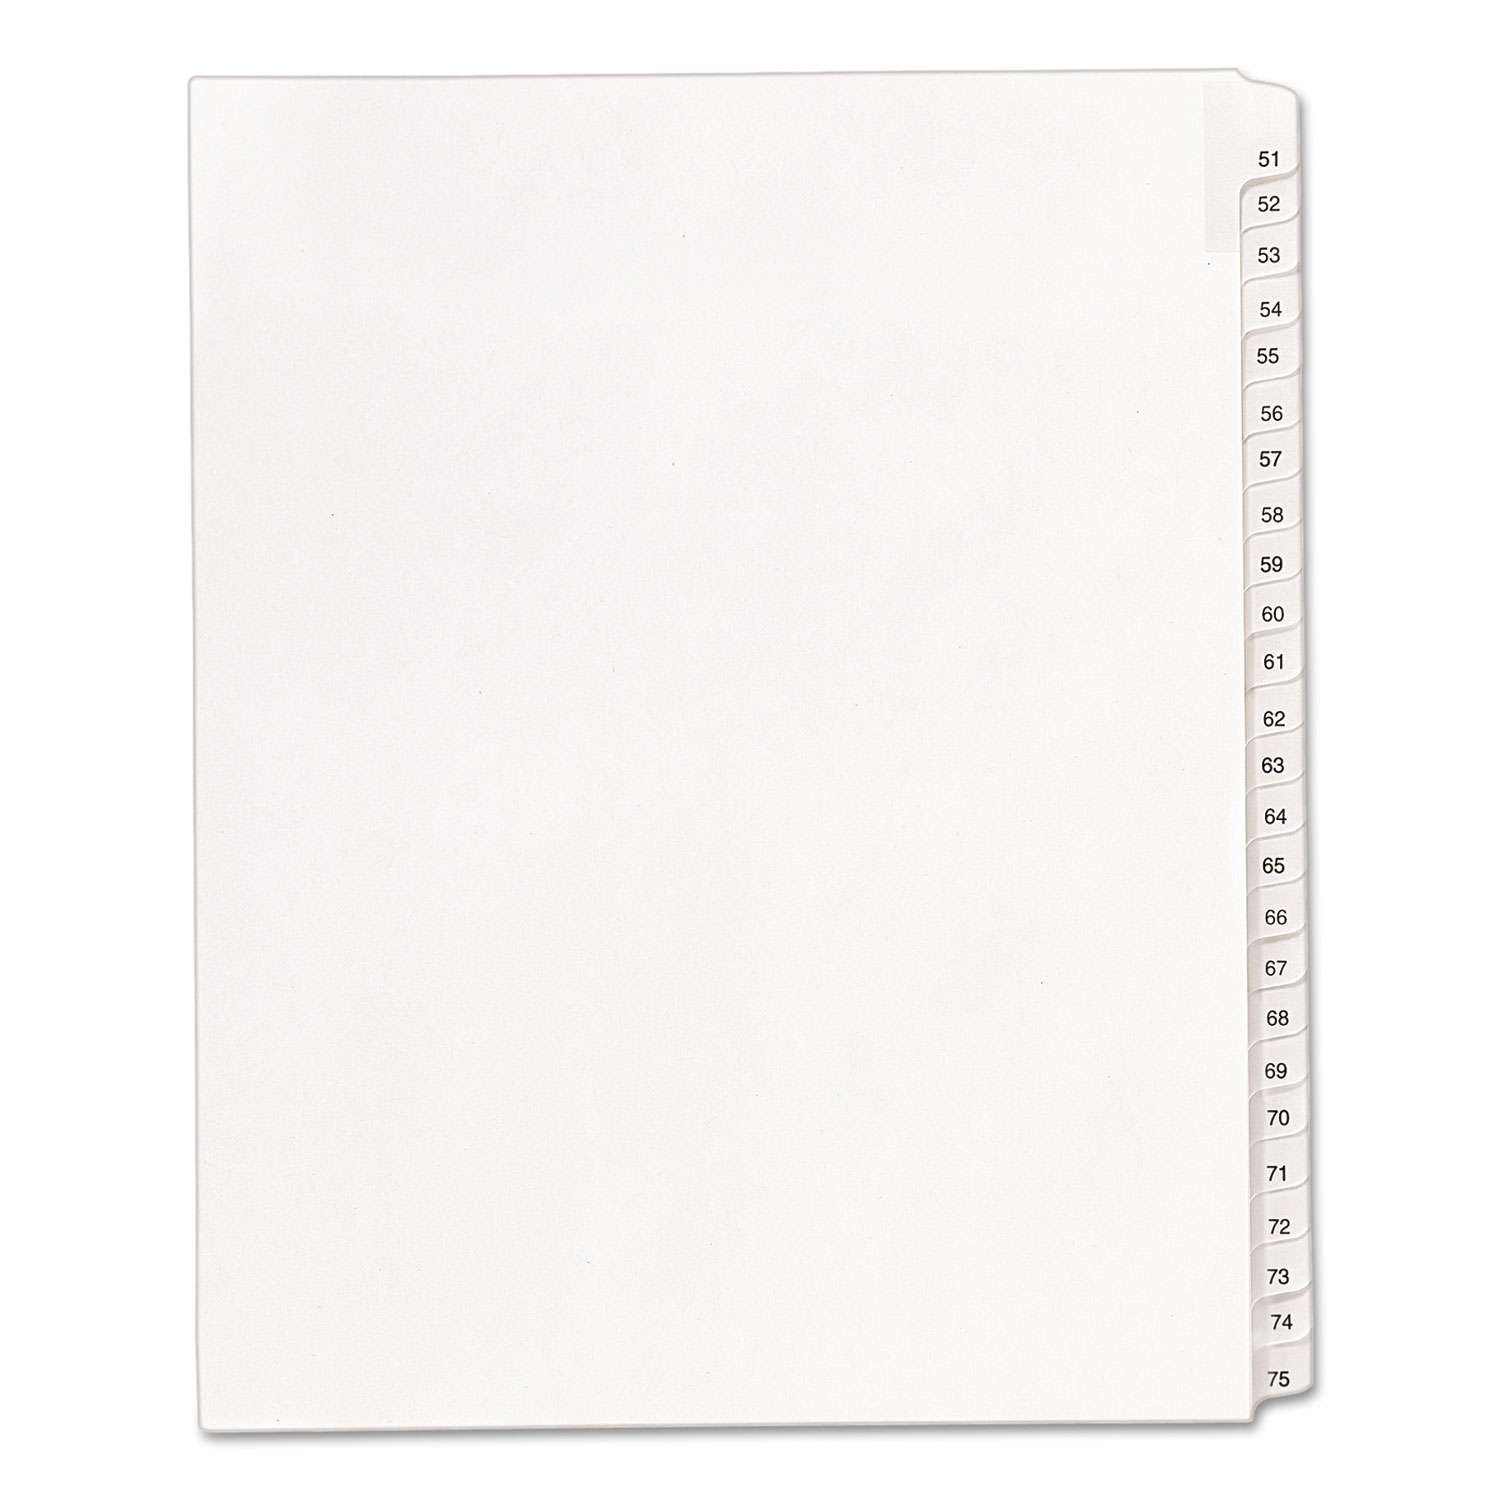  Avery 01703 Preprinted Legal Exhibit Side Tab Index Dividers, Allstate Style, 25-Tab, 51 to 75, 11 x 8.5, White, 1 Set (AVE01703) 